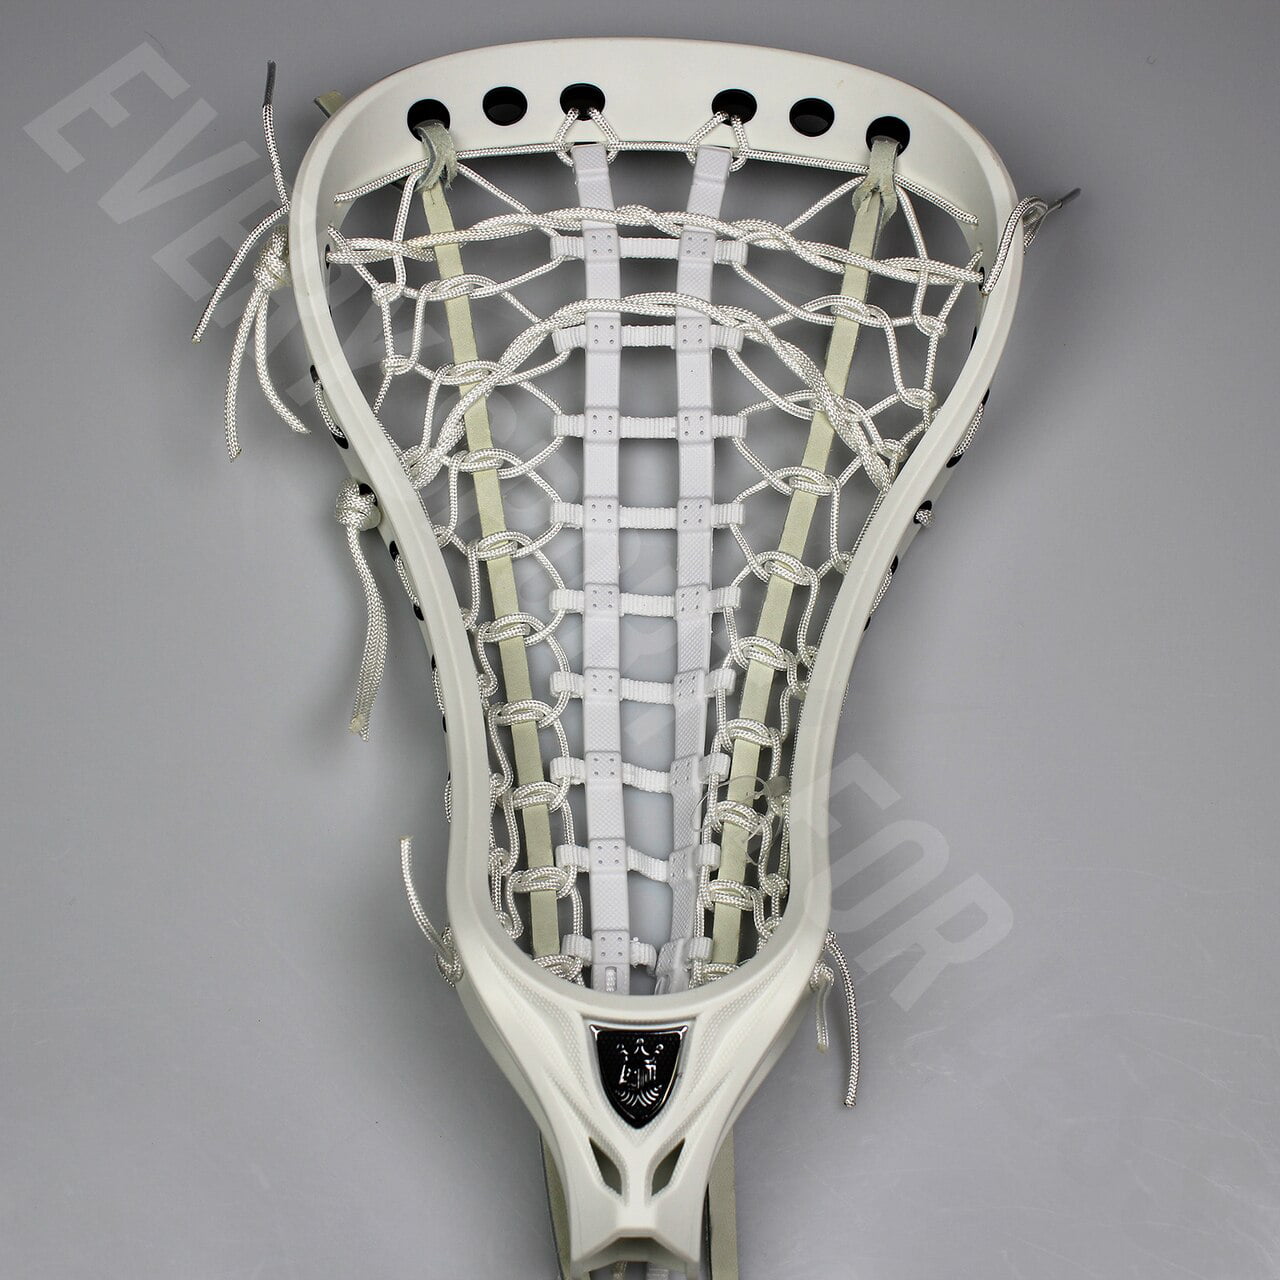 White and Black Lists @ $140 NEW Brine Mantra III Women's Strung Lacrosse Head 